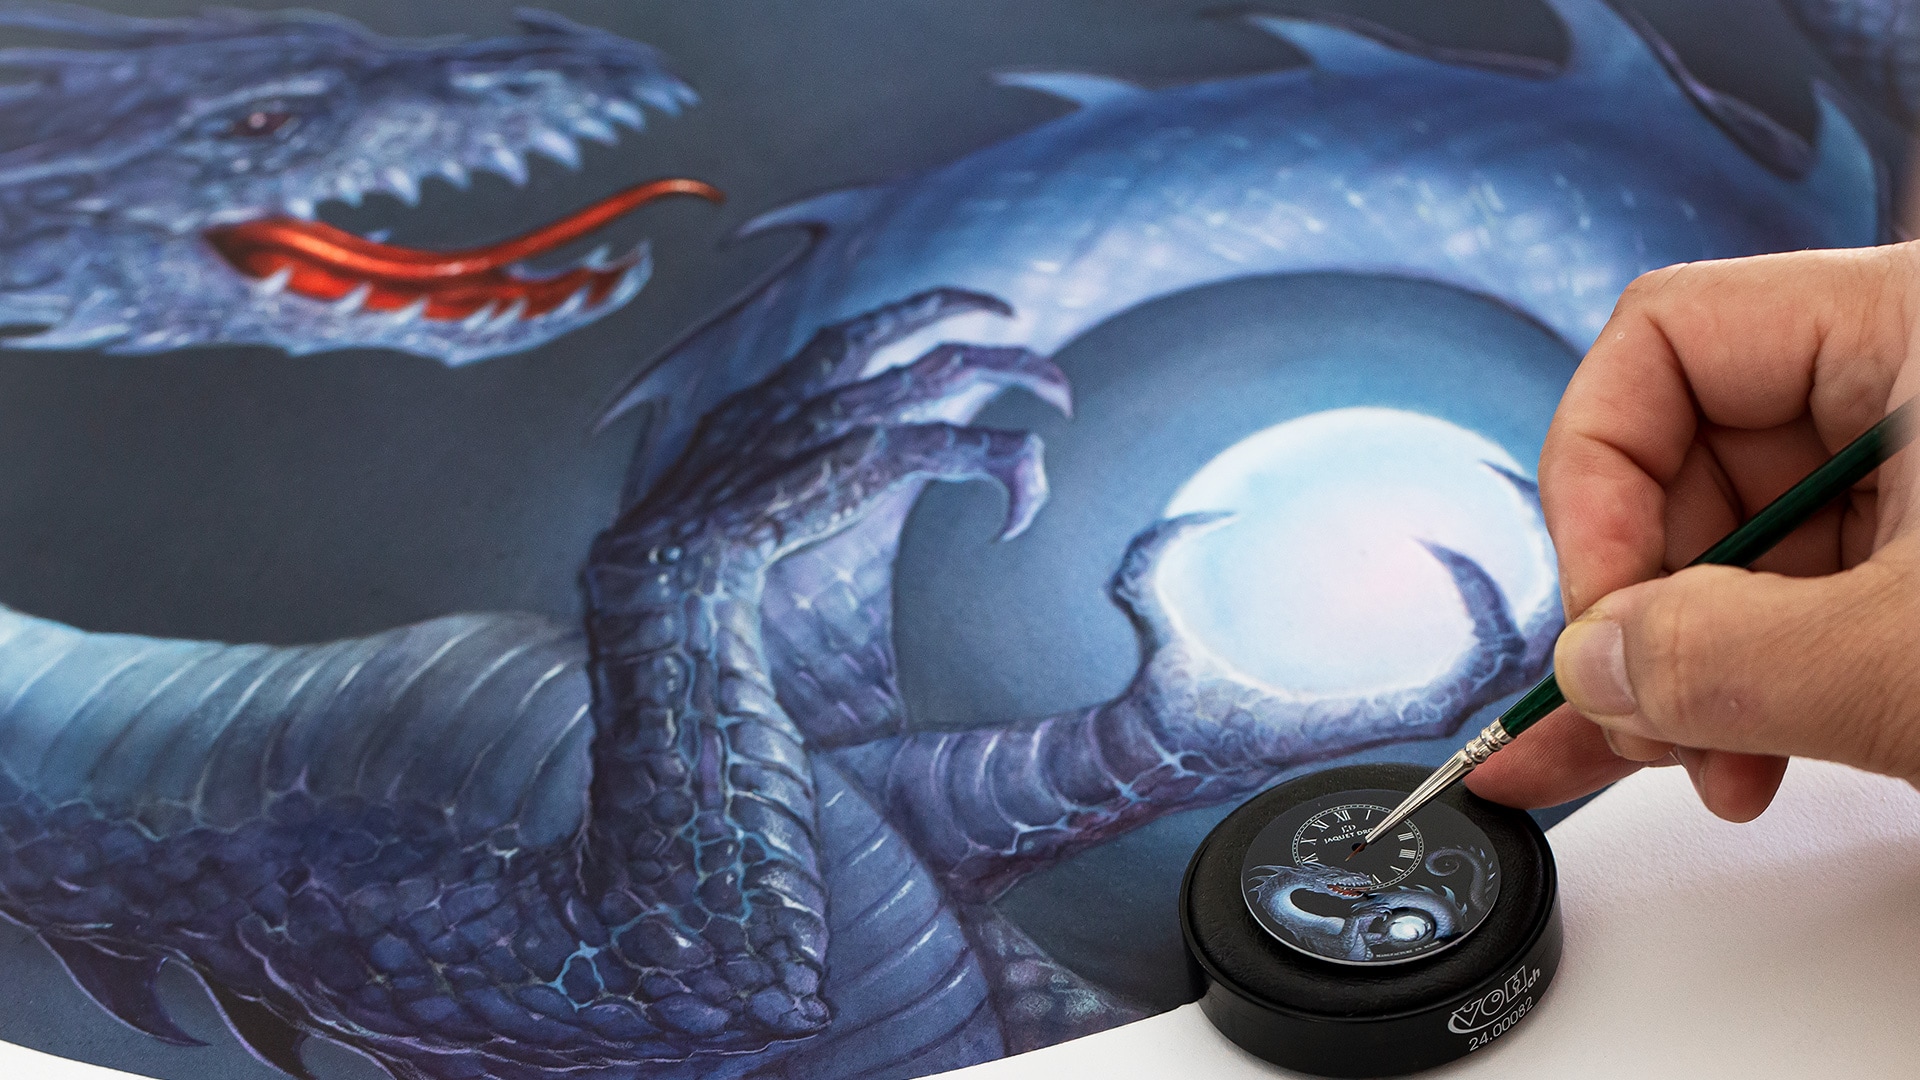 Petite Heure Minute “Dragon”: the first masterpiece created from the collaboration between Jaquet Droz and John Howe